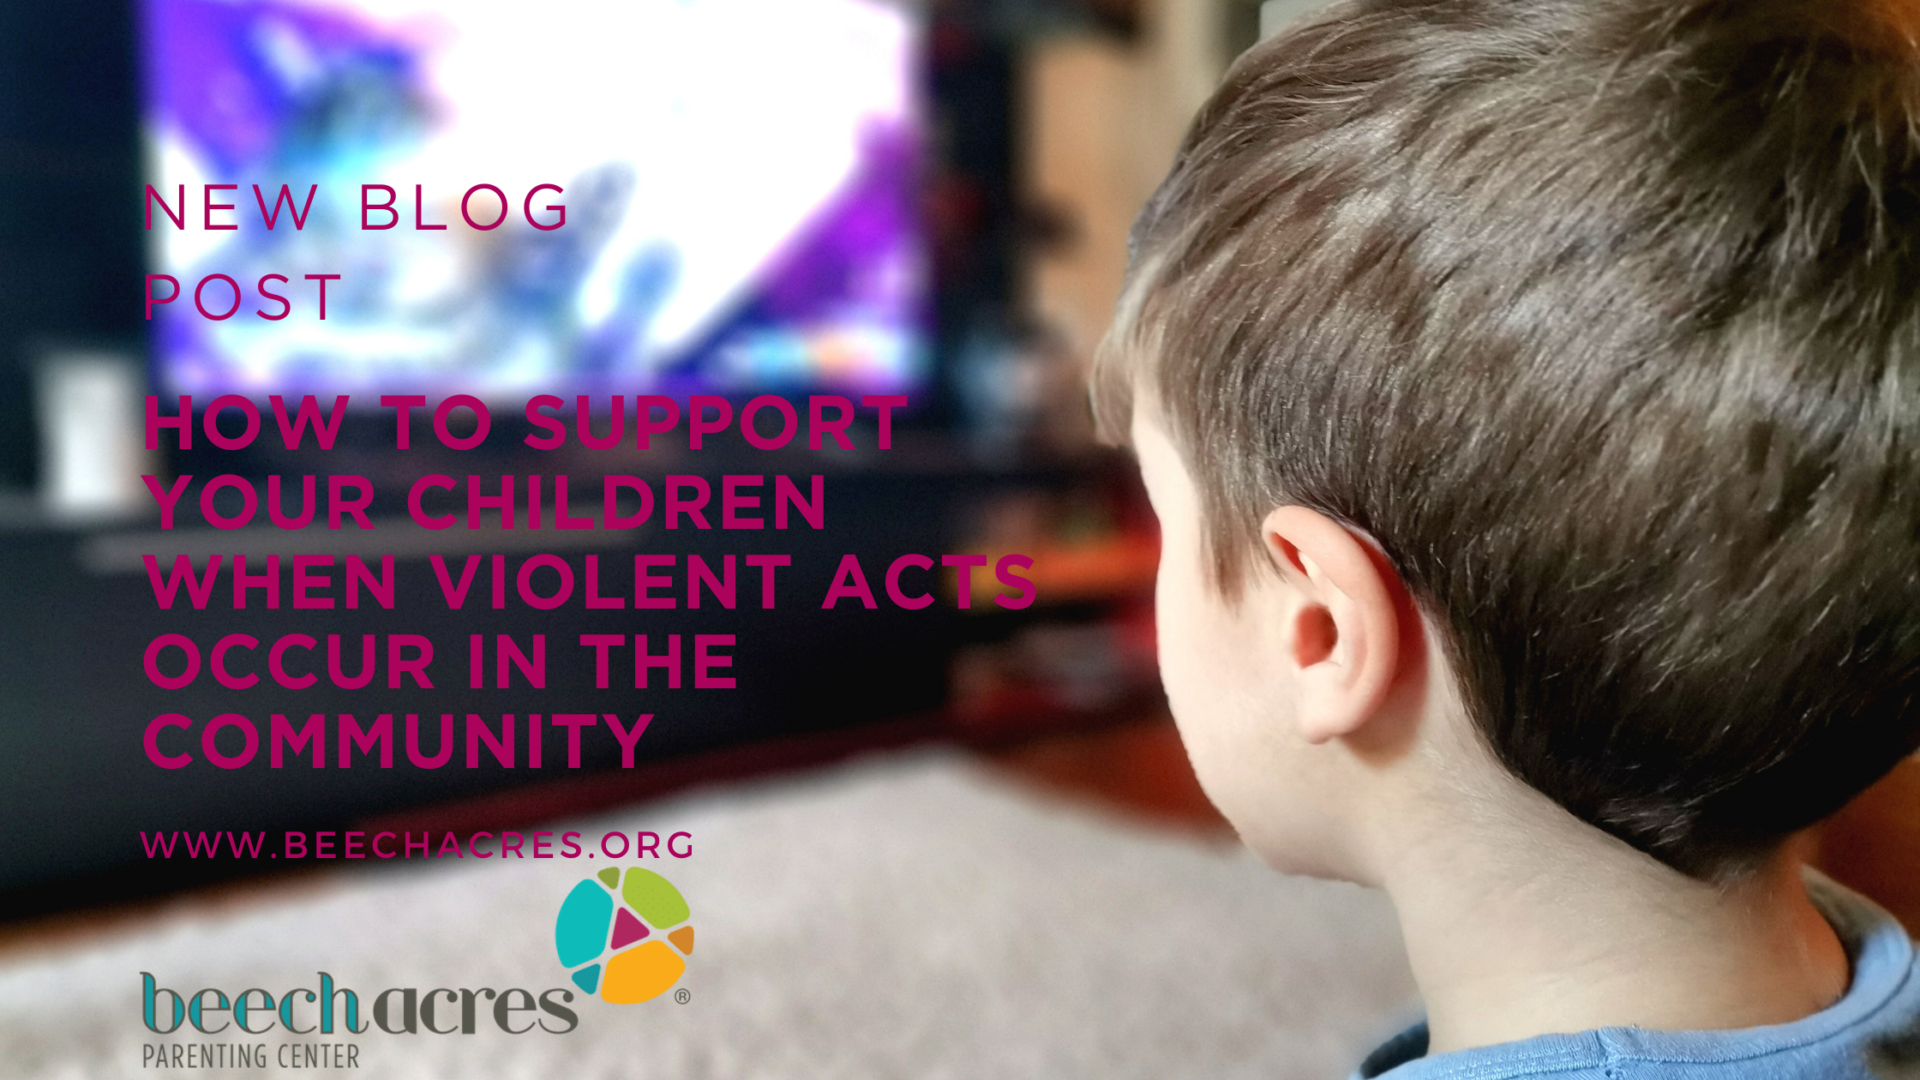 How To Support Your Children When Violent Acts Occur In The Community